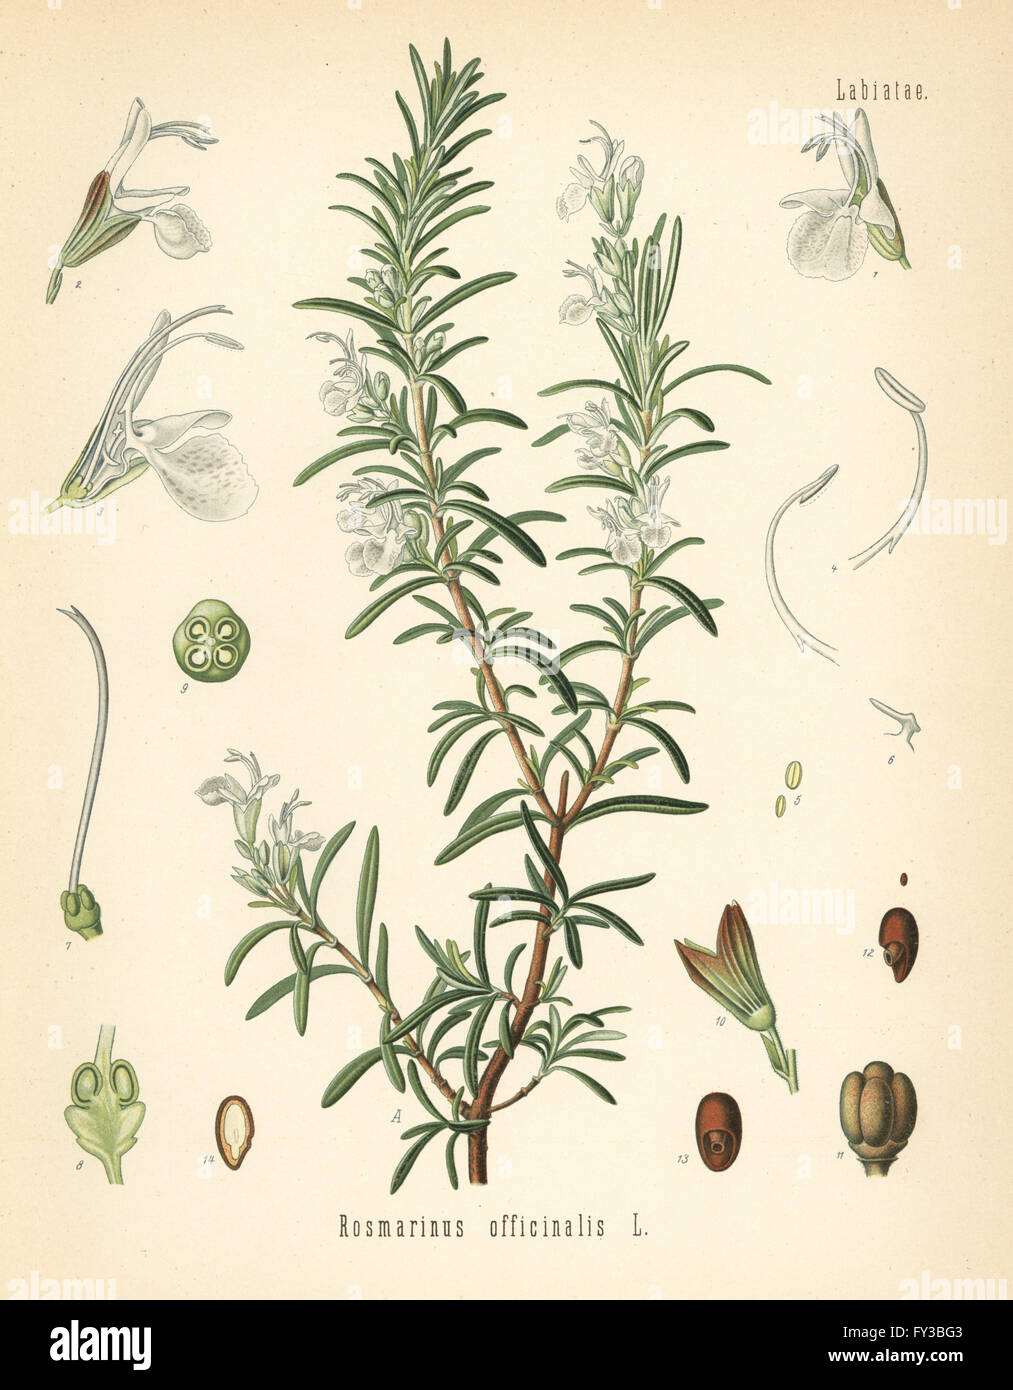 Rosemary, Rosmarinus officinalis. Chromolithograph after a botanical illustration from Hermann Adolph Koehler's Medicinal Plants, edited by Gustav Pabst, Koehler, Germany, 1887. Stock Photo